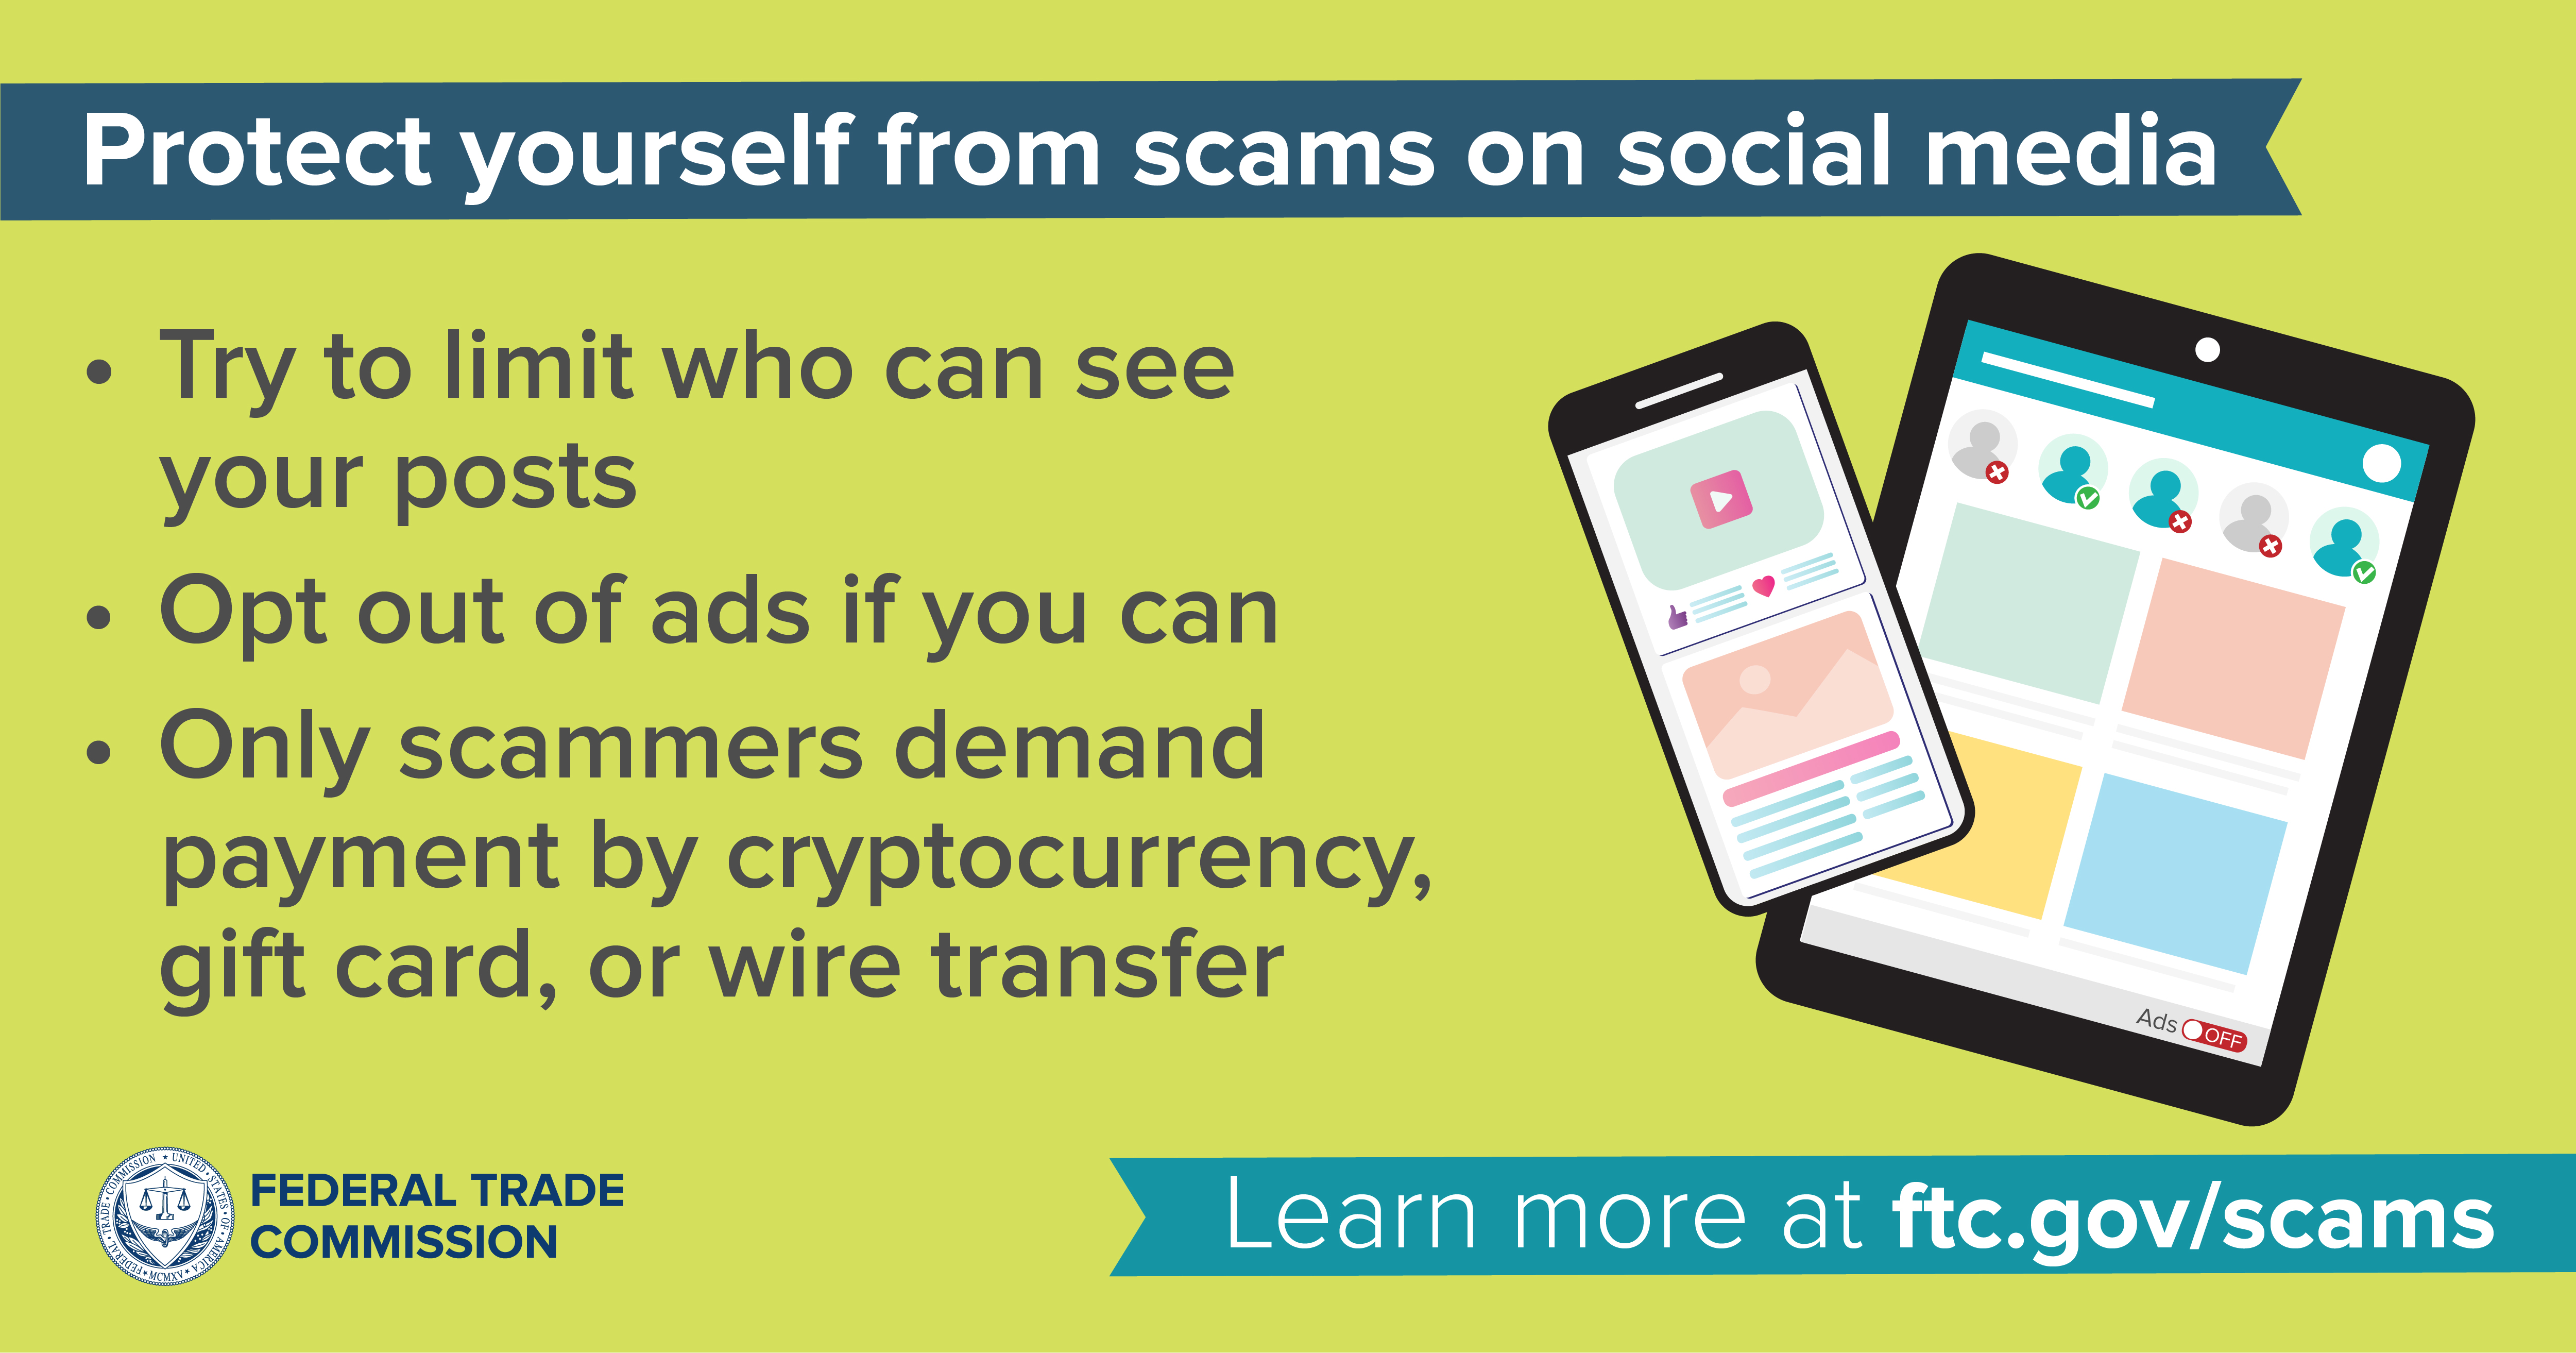 If you see or experience scam on social media, report it to ReportFraud.ftc.gov